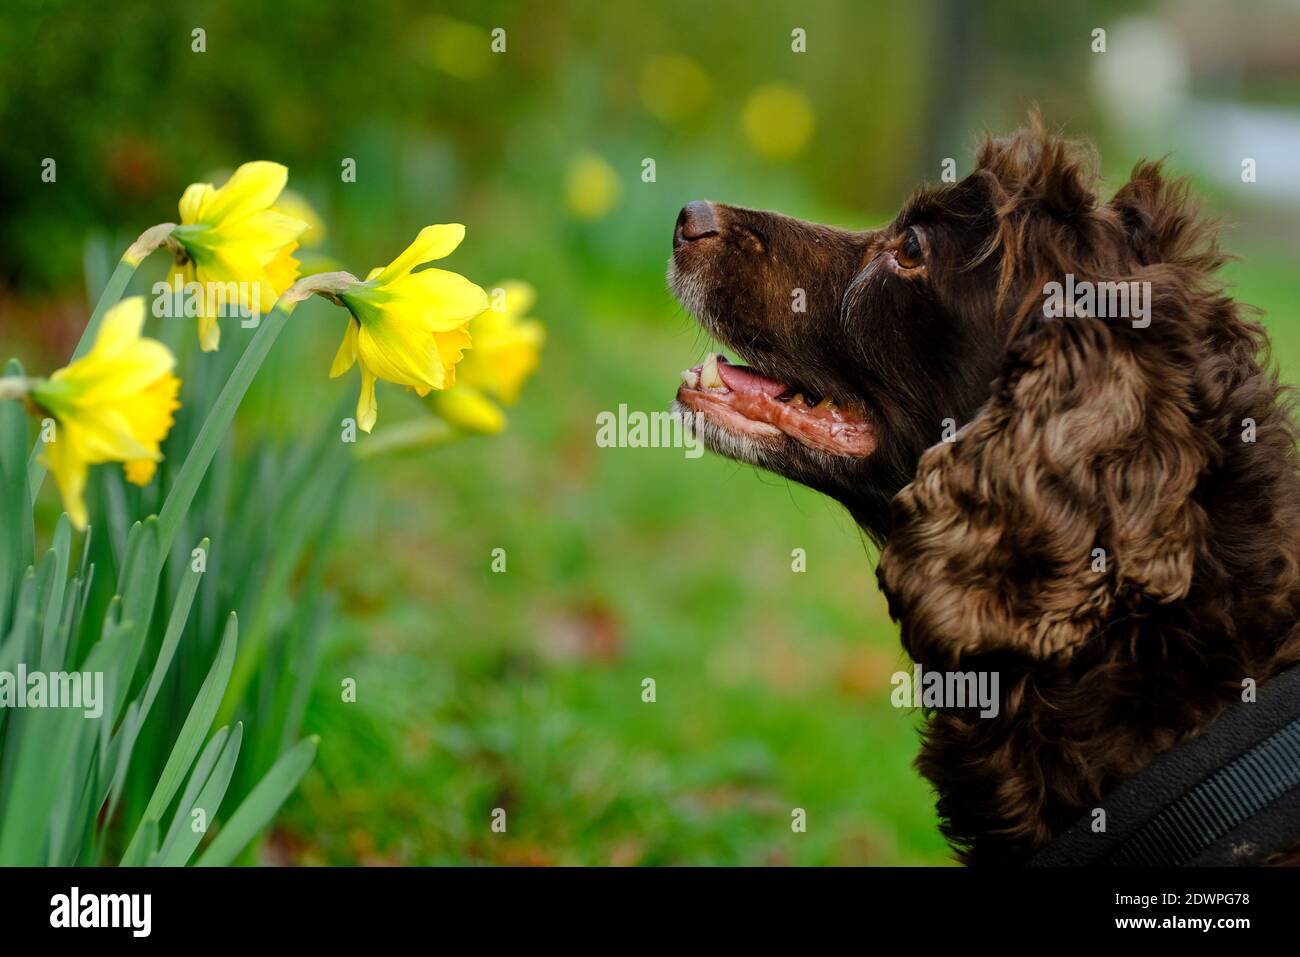 Laughton, East Sussex, UK. 23rd Dec, 2020. Fudge, a cocker spnaiel, sniffing a very early display off daffodils on a roadside in rural East Sussex. Credit: Peter Cripps/Alamy Live News Stock Photo